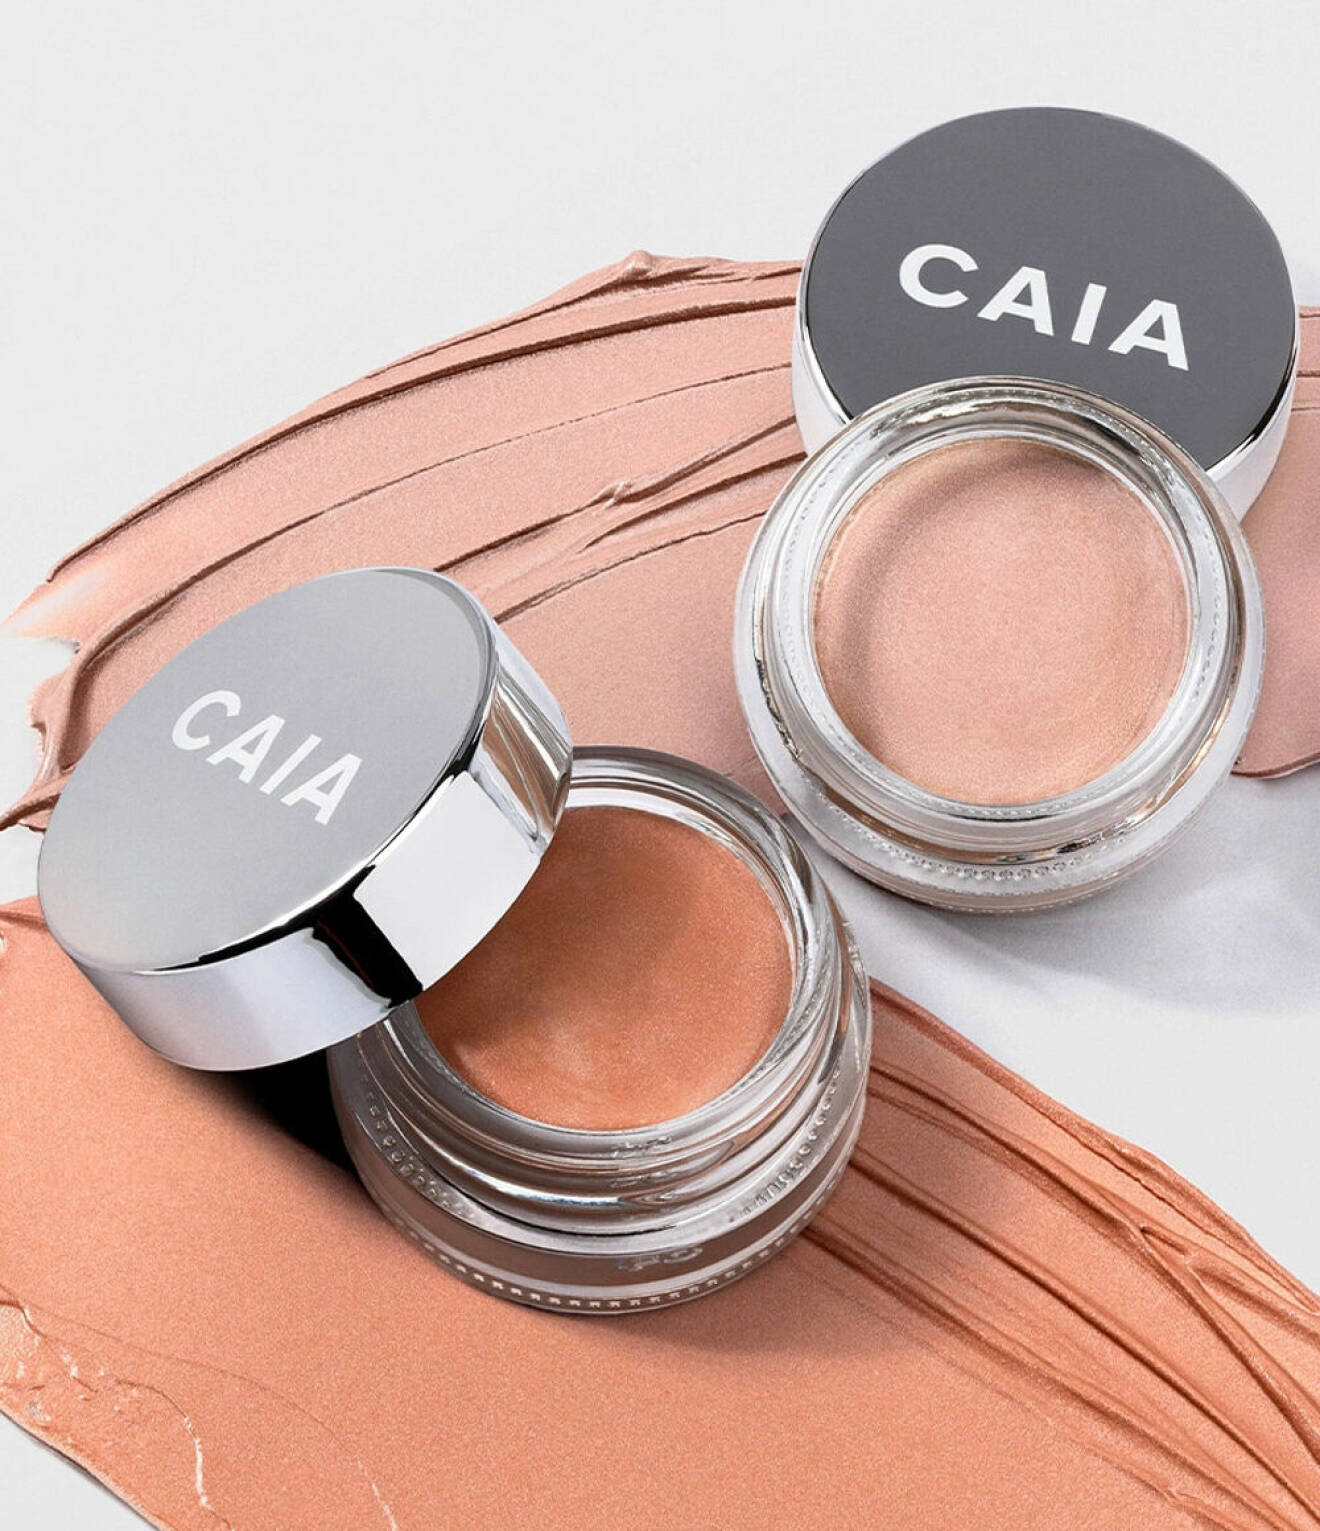 caia concealer recension test wake me up cream expert